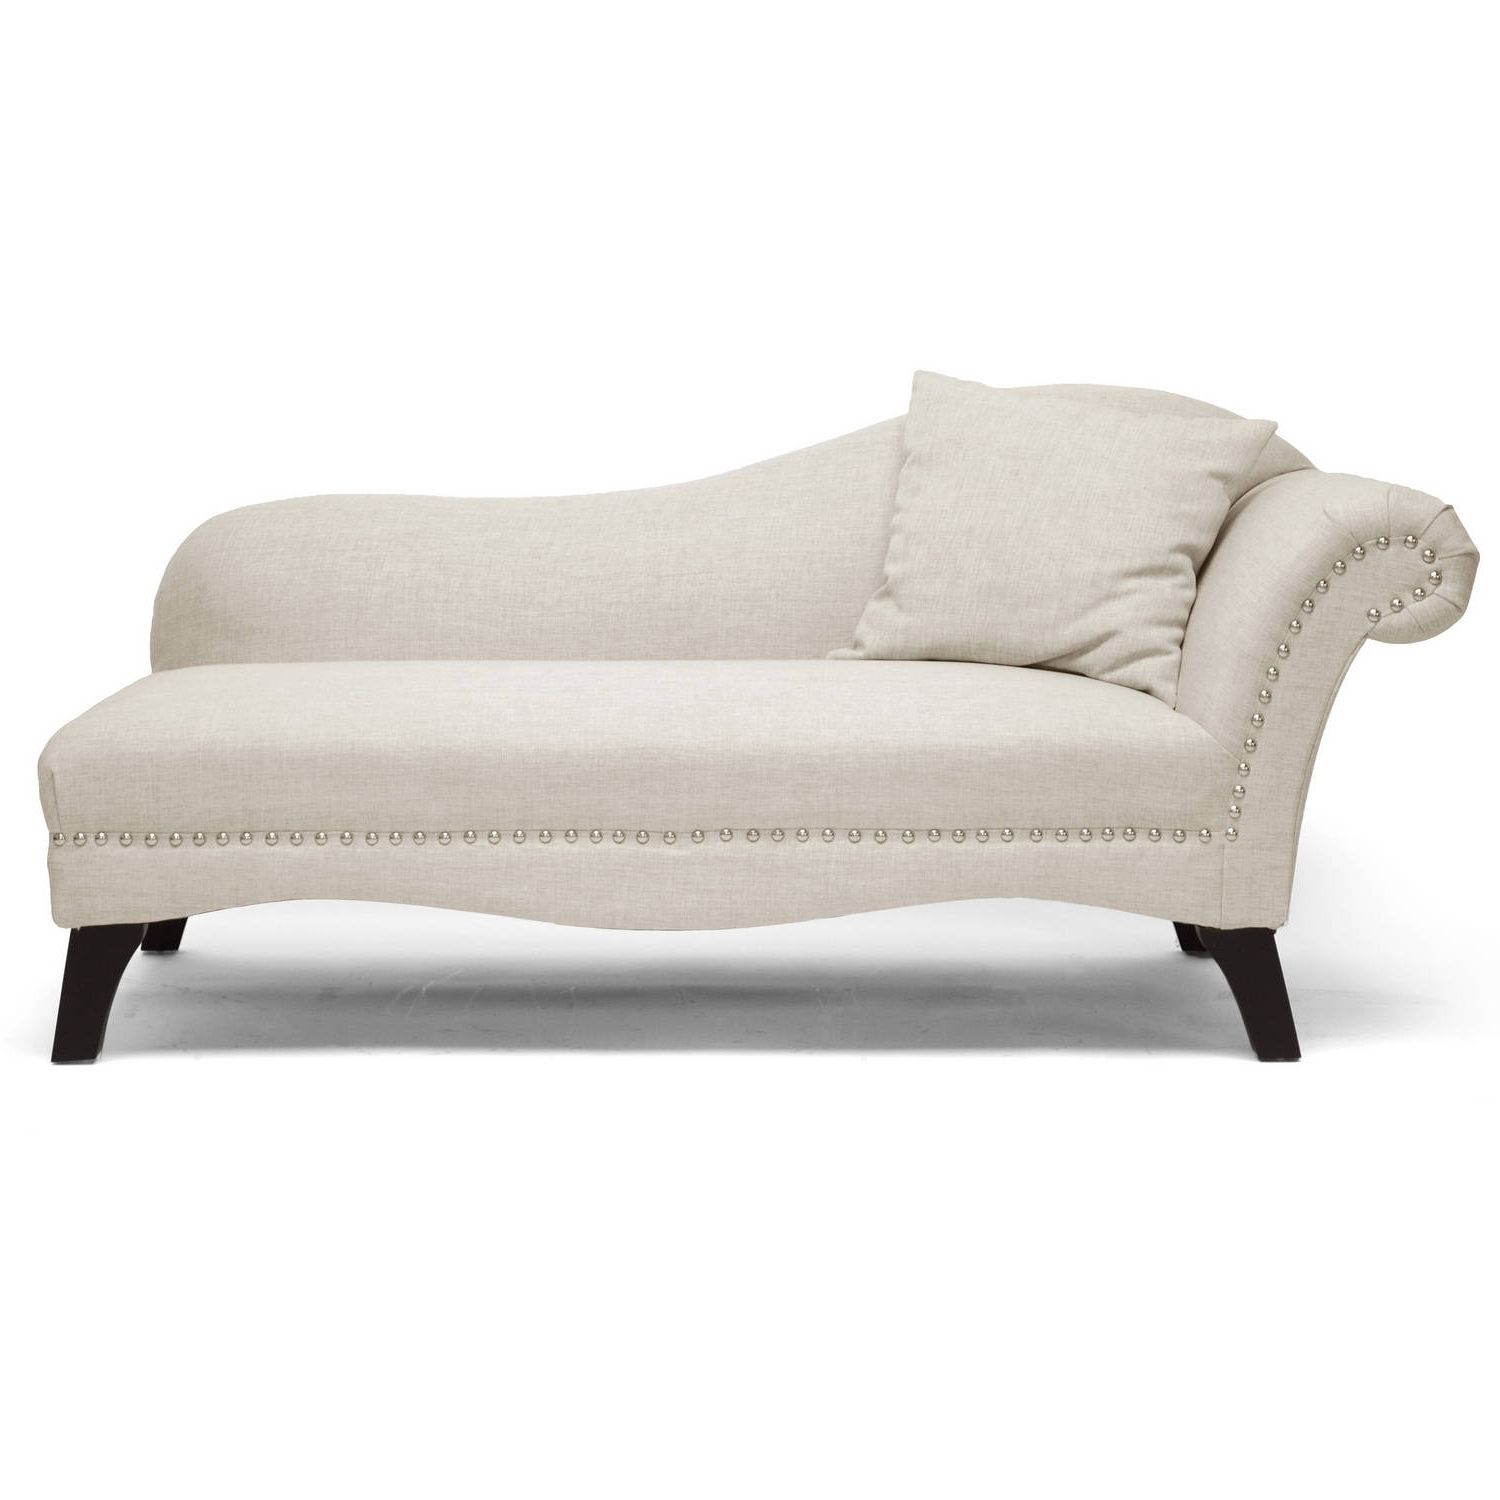 Well Liked Chaise Lounges – Walmart Inside White Chaise Lounges (View 4 of 15)